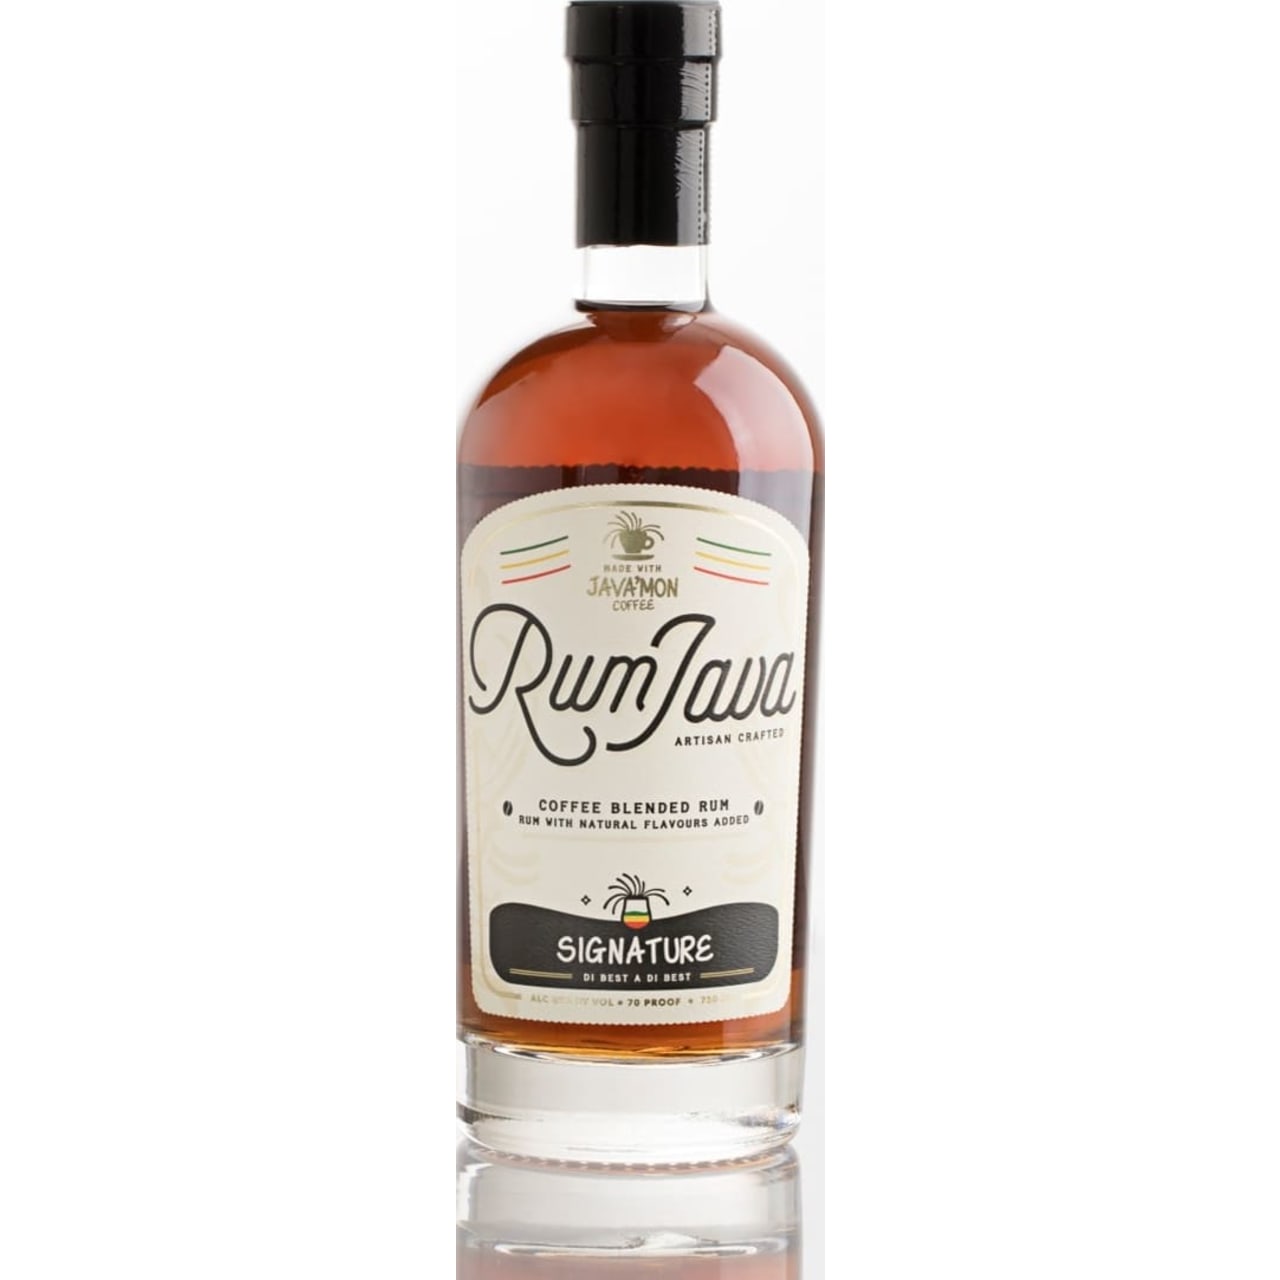 Rum Java is a tasty American rum infused with freshly roasted Signature Kona Blend coffee beans. The beans come from Hawaii and as the bean produces a lot of oil, RumJava Signature has a particularly silky texture.